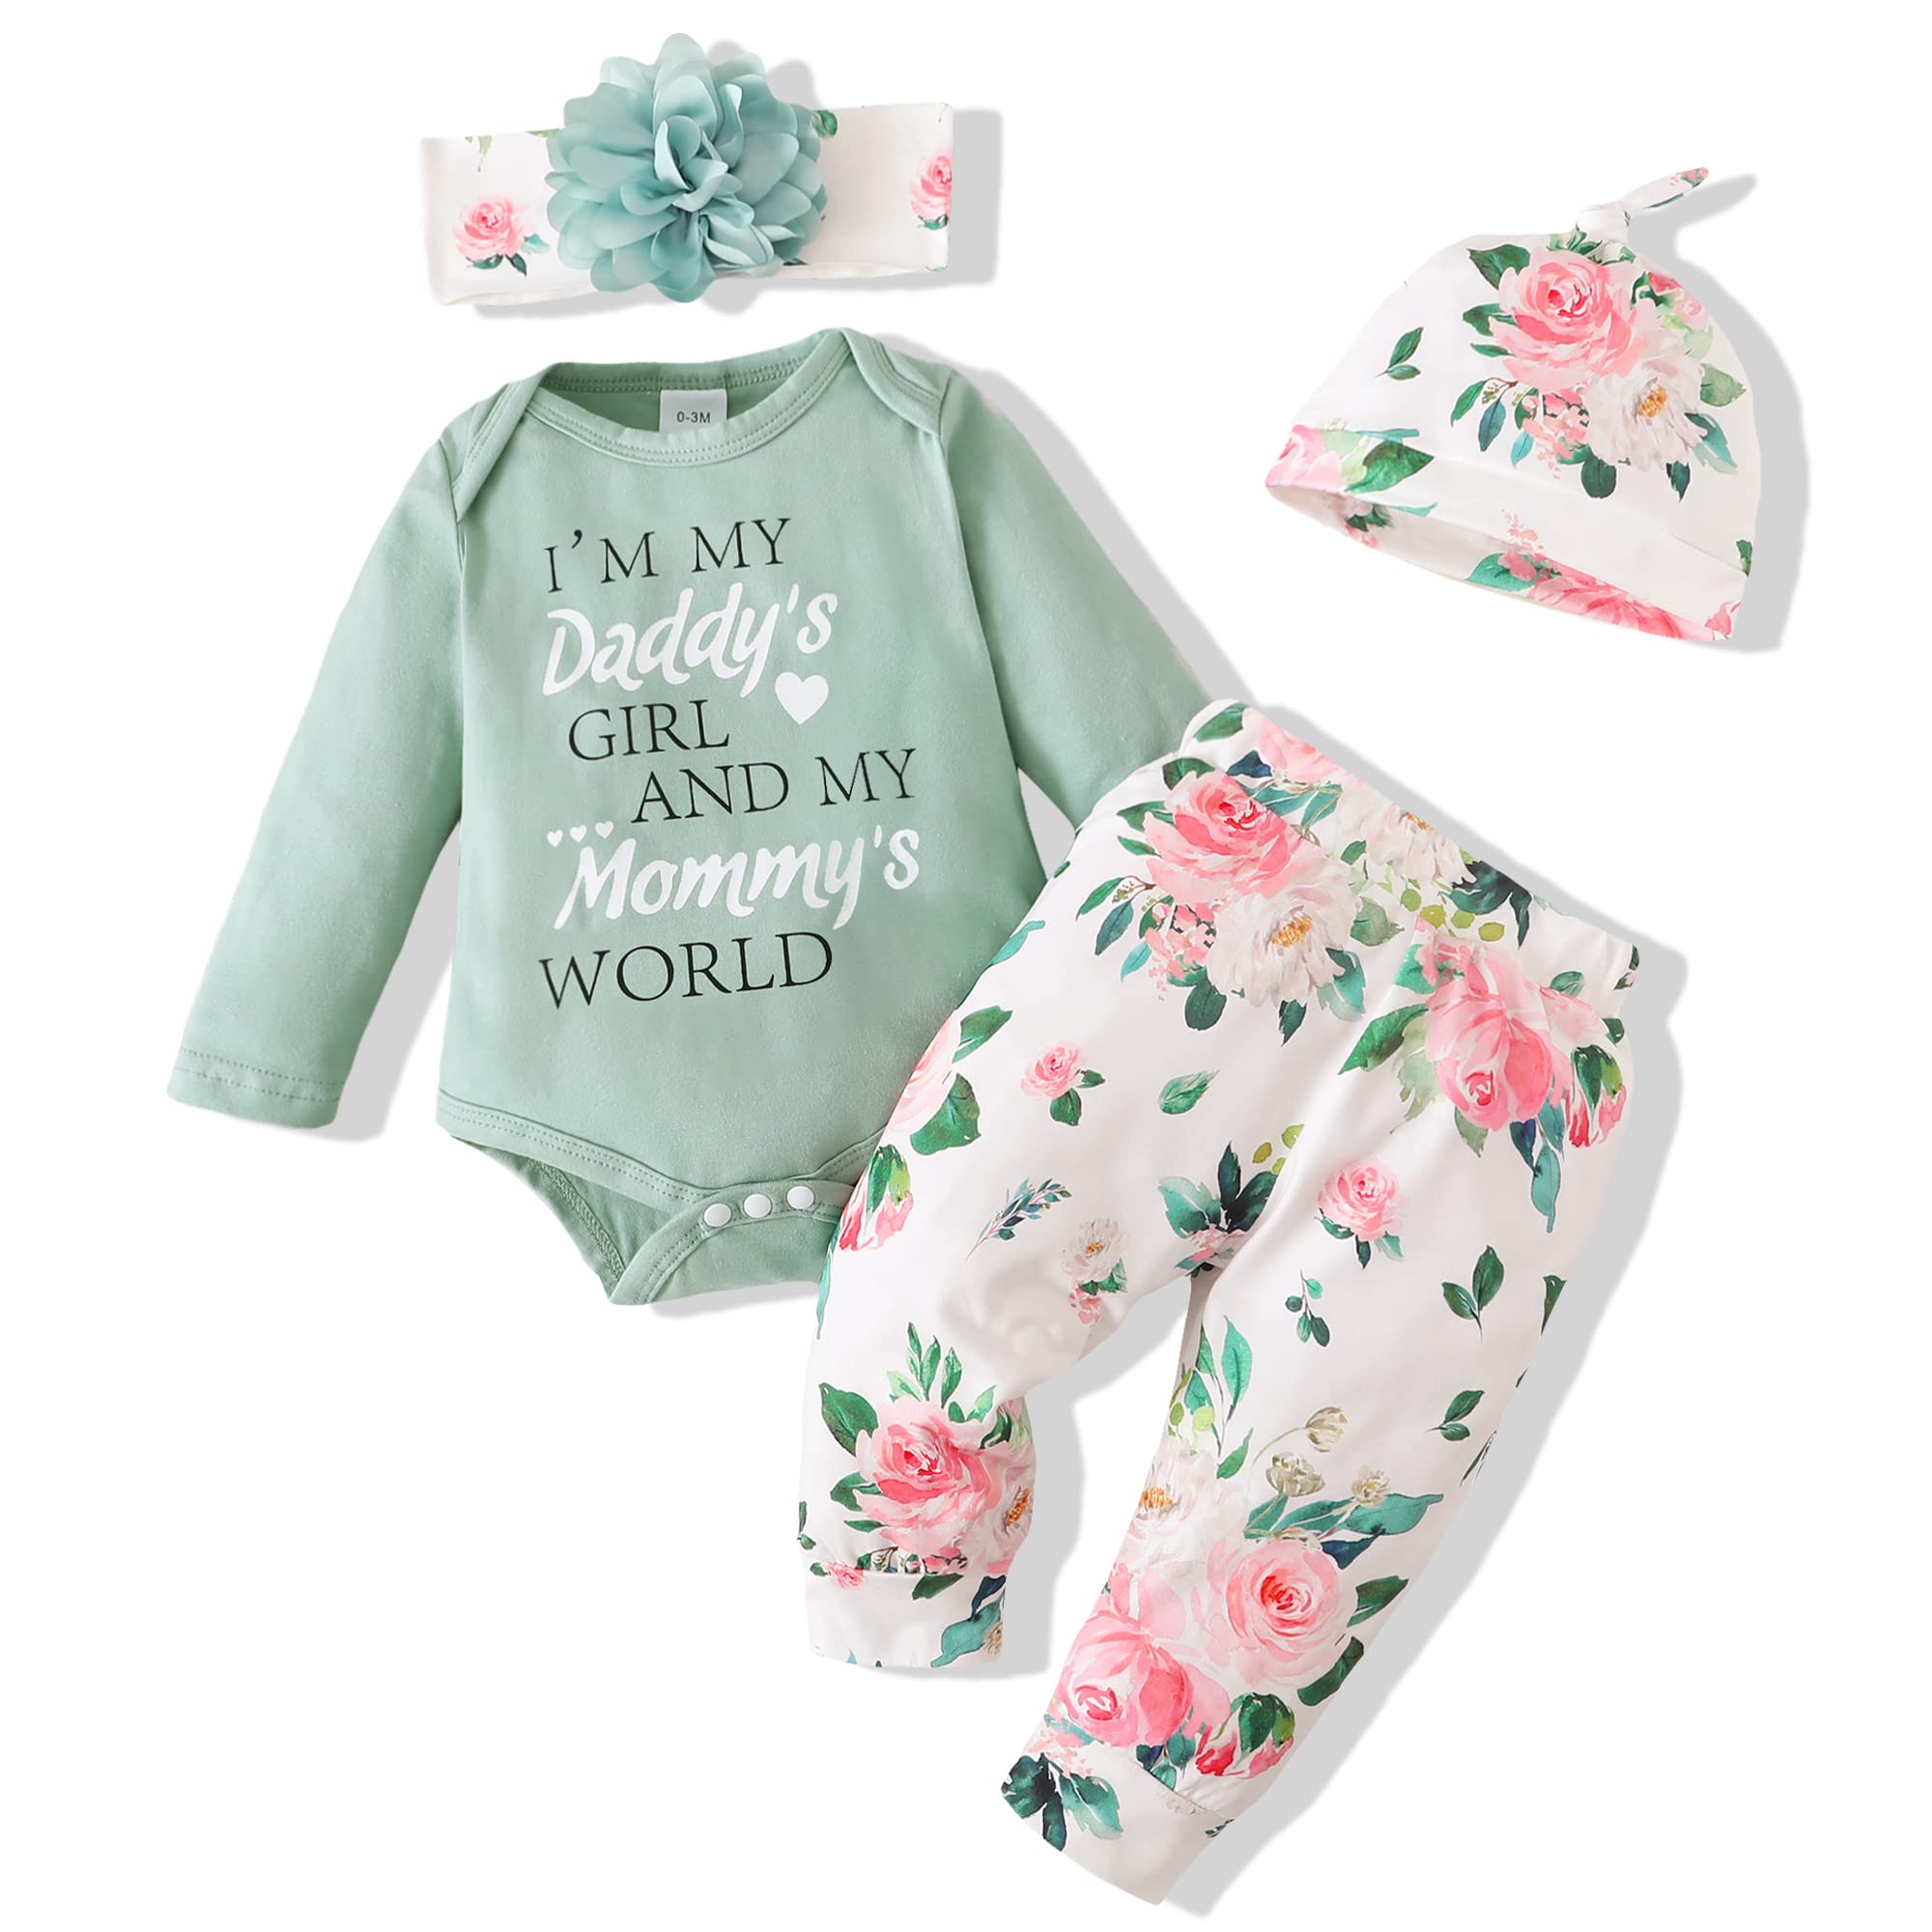 Renotemy Newborn girl clothes Outfits gifts Long Sleeve Tops Floral Pants Sets Spring Fall Winter Baby girl clothes 3-6 Months L